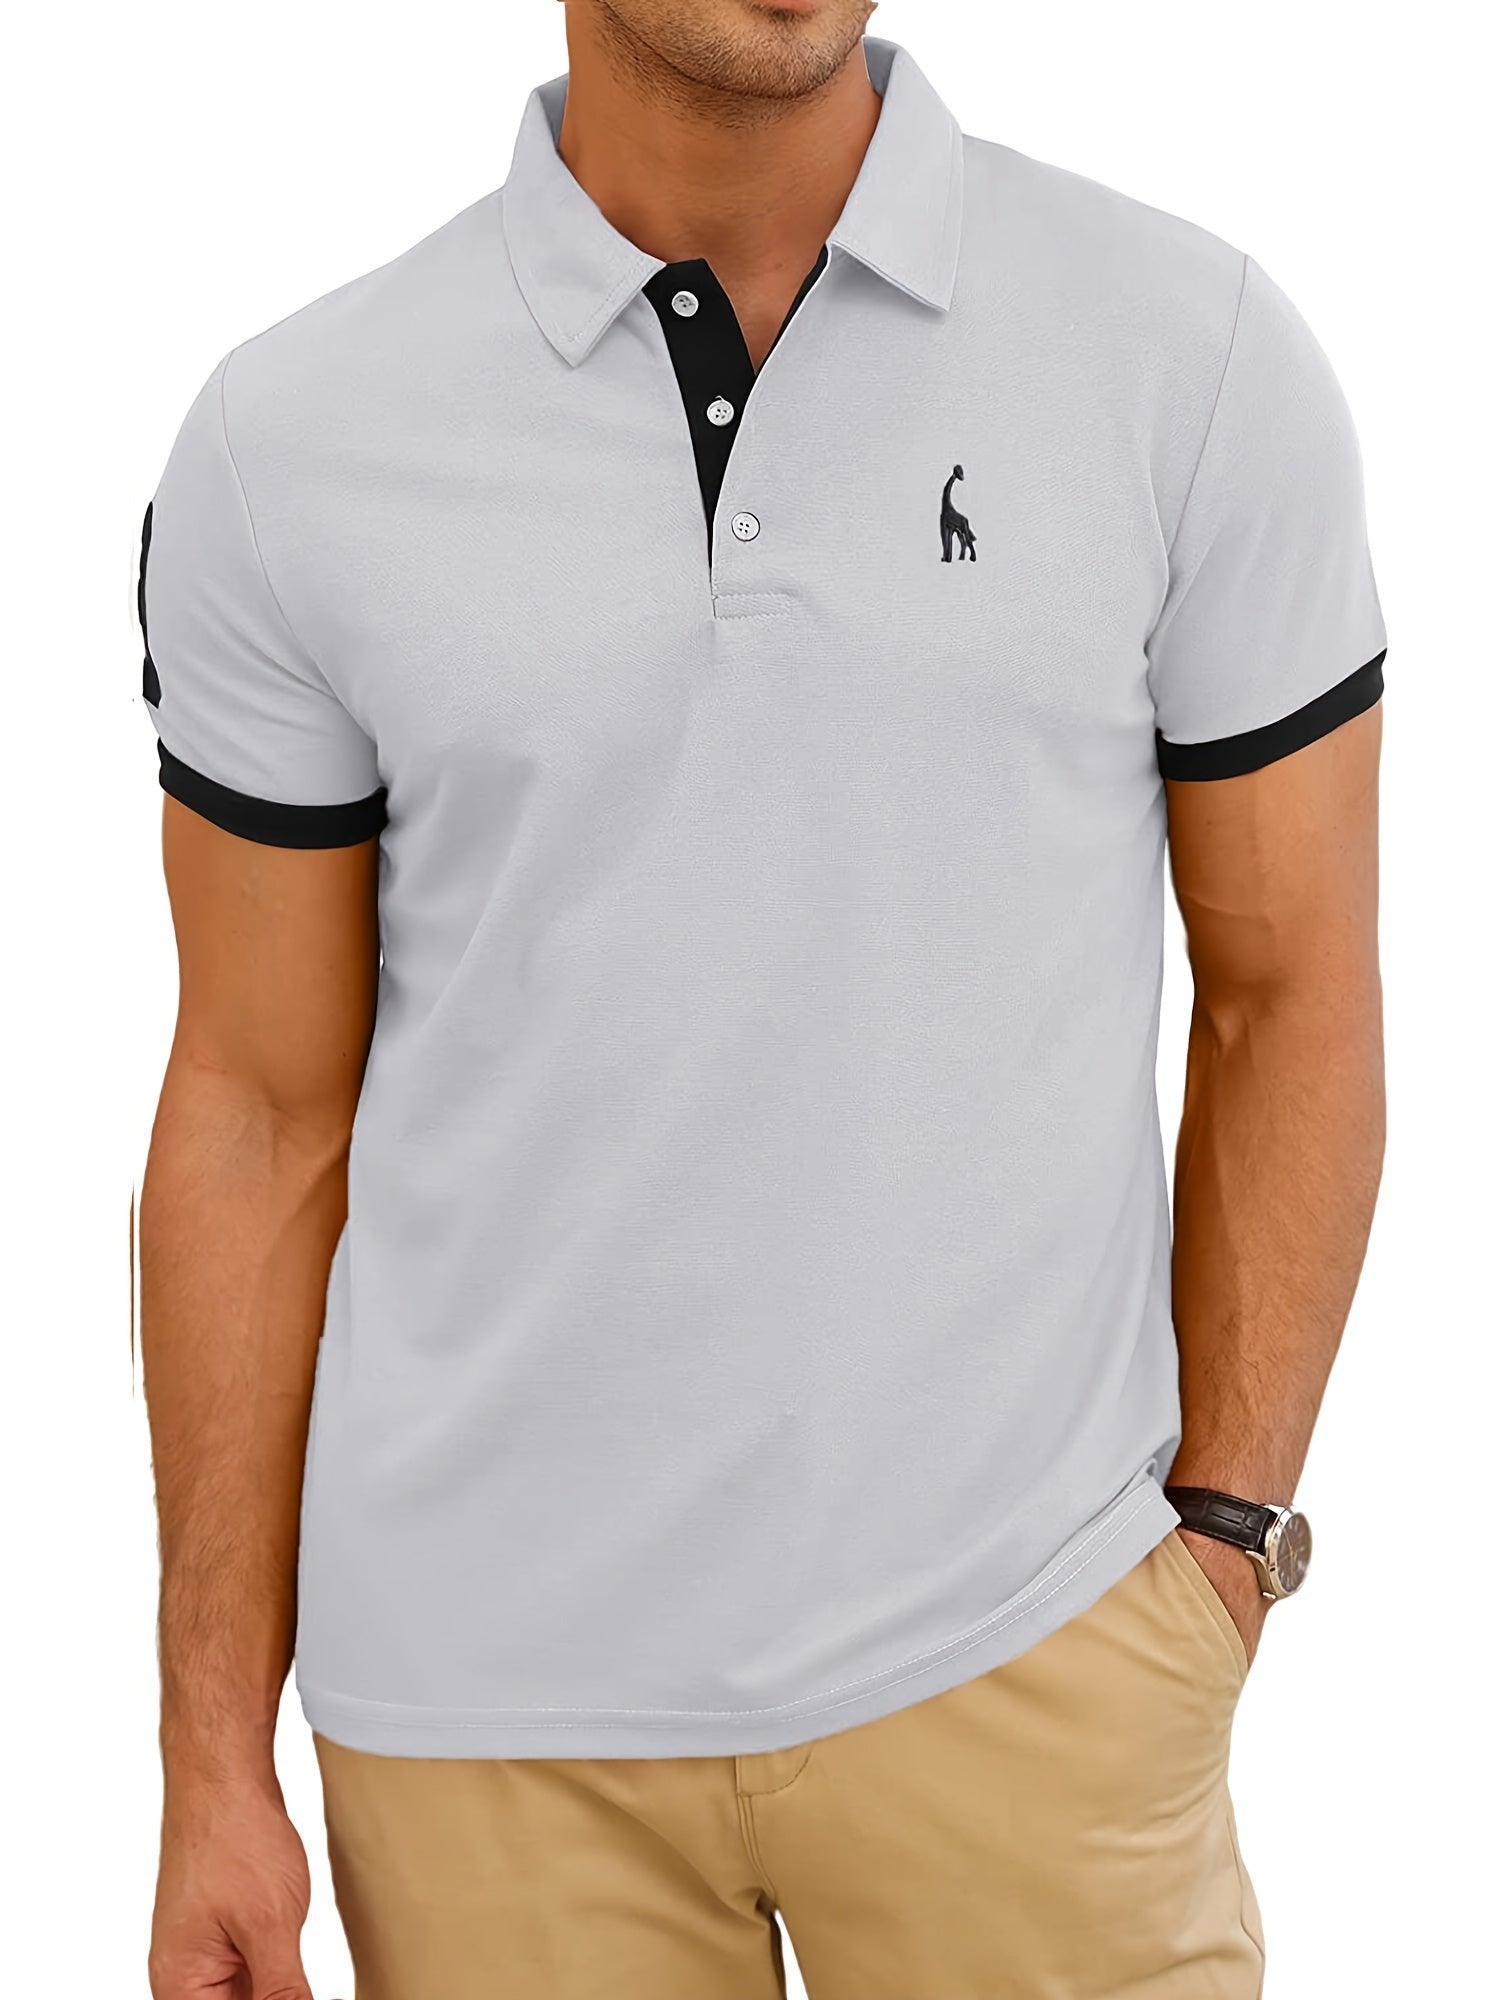 Men's Casual Slim Fit Embroidered Striped Polo Shirt